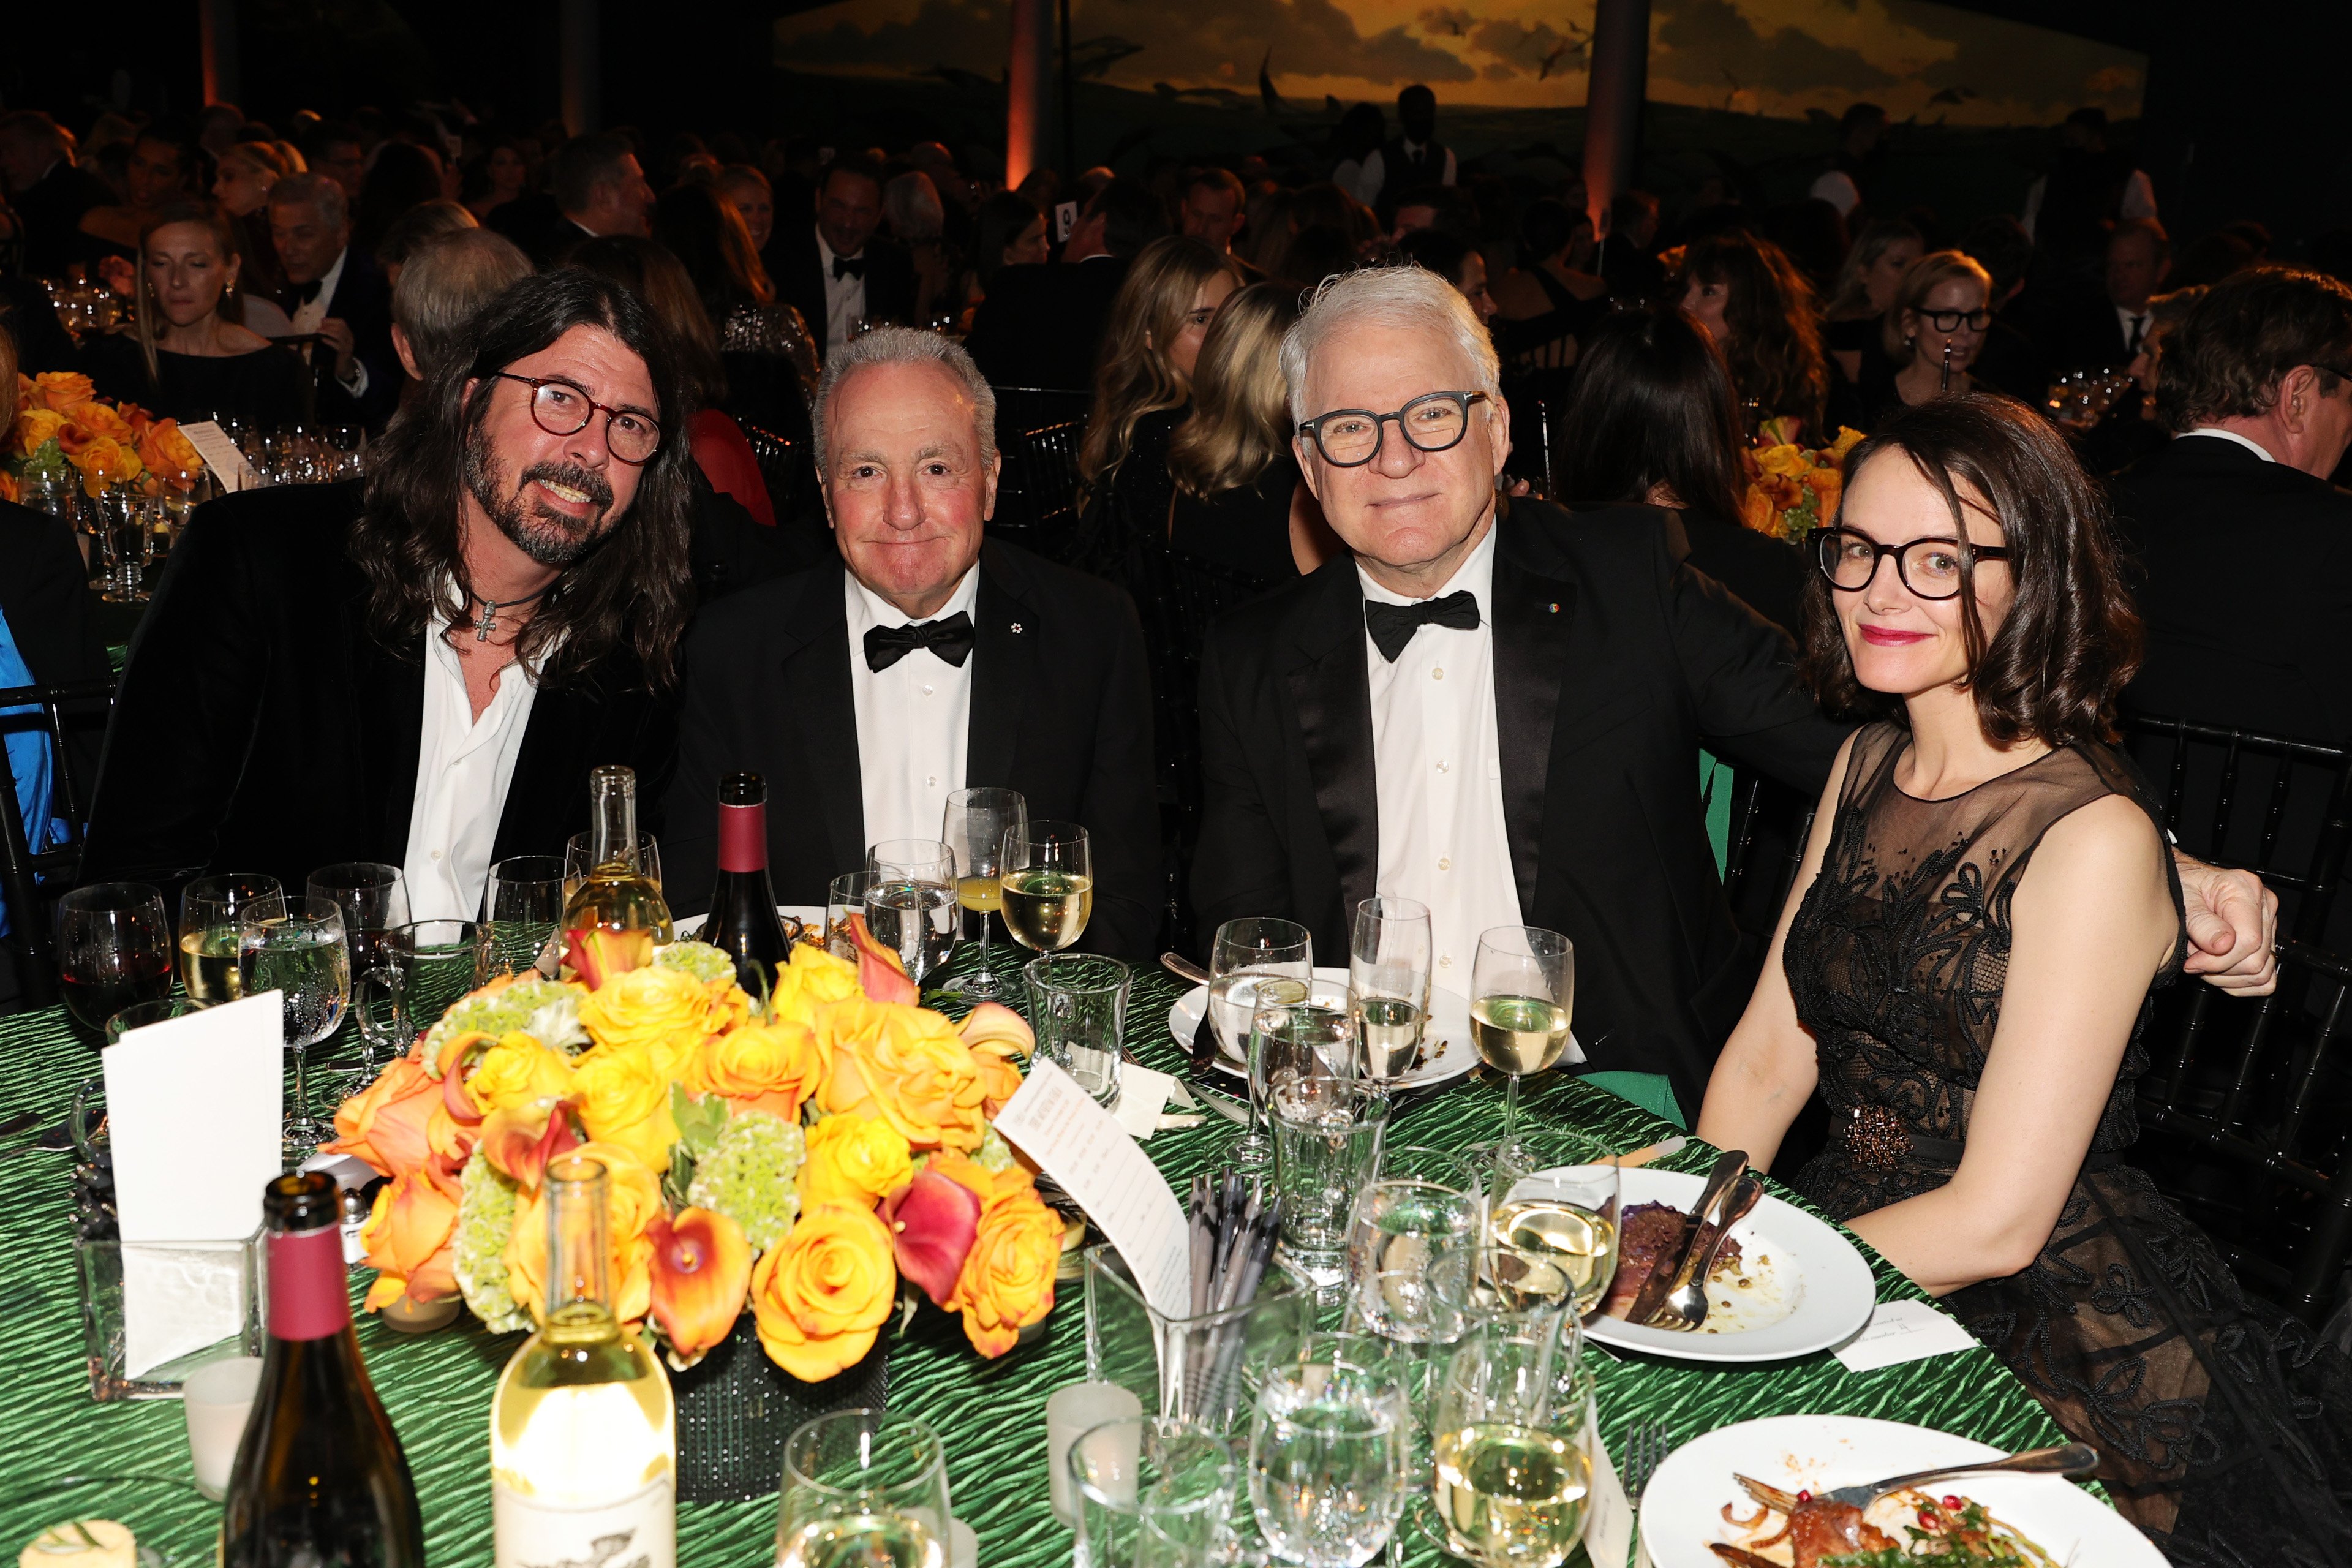 Dave Grohl, Lorne Michaels, Steve Martin and Anne Stringfield attend the American Museum of Natural History Gala 2021 on November 18, 2021 in New York City. | Source: Getty Images